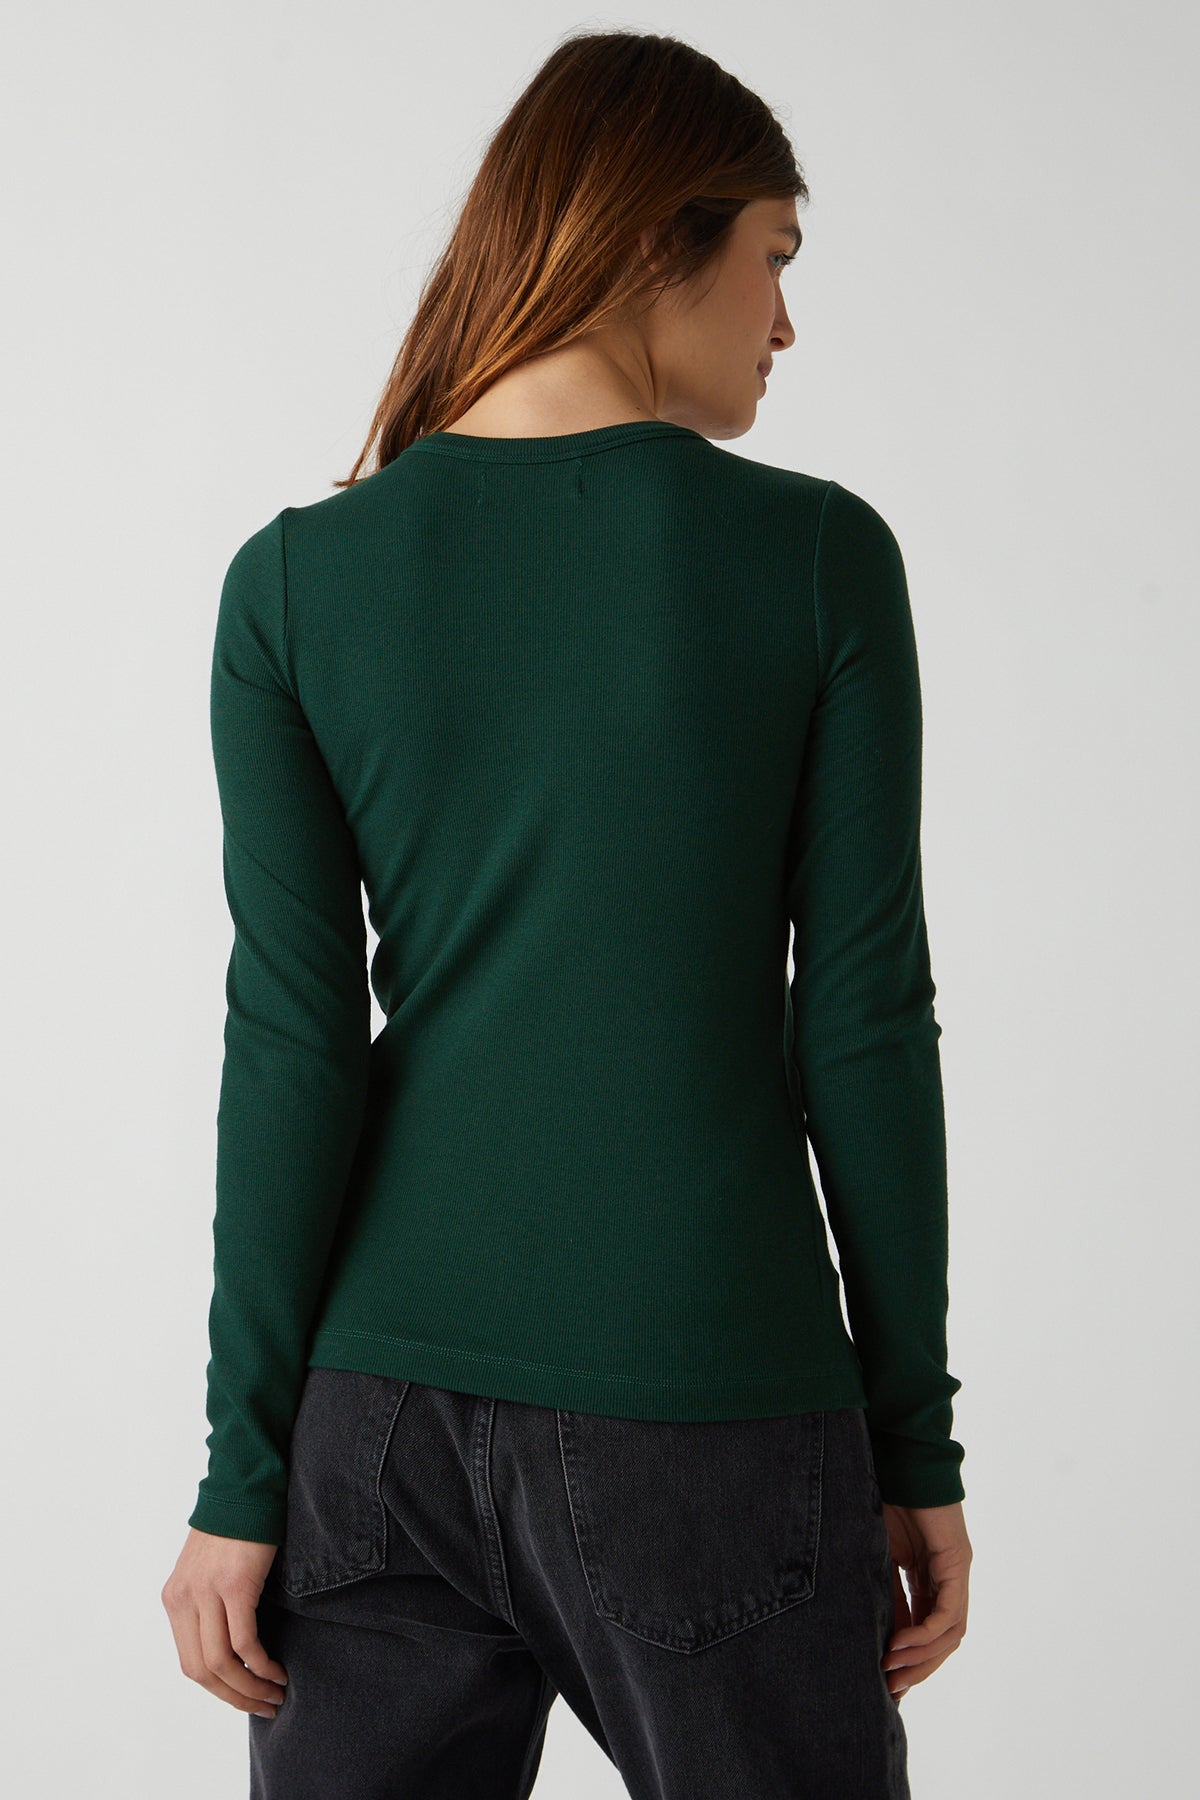 Camino Tee in forest green with black denim back-25483428757697